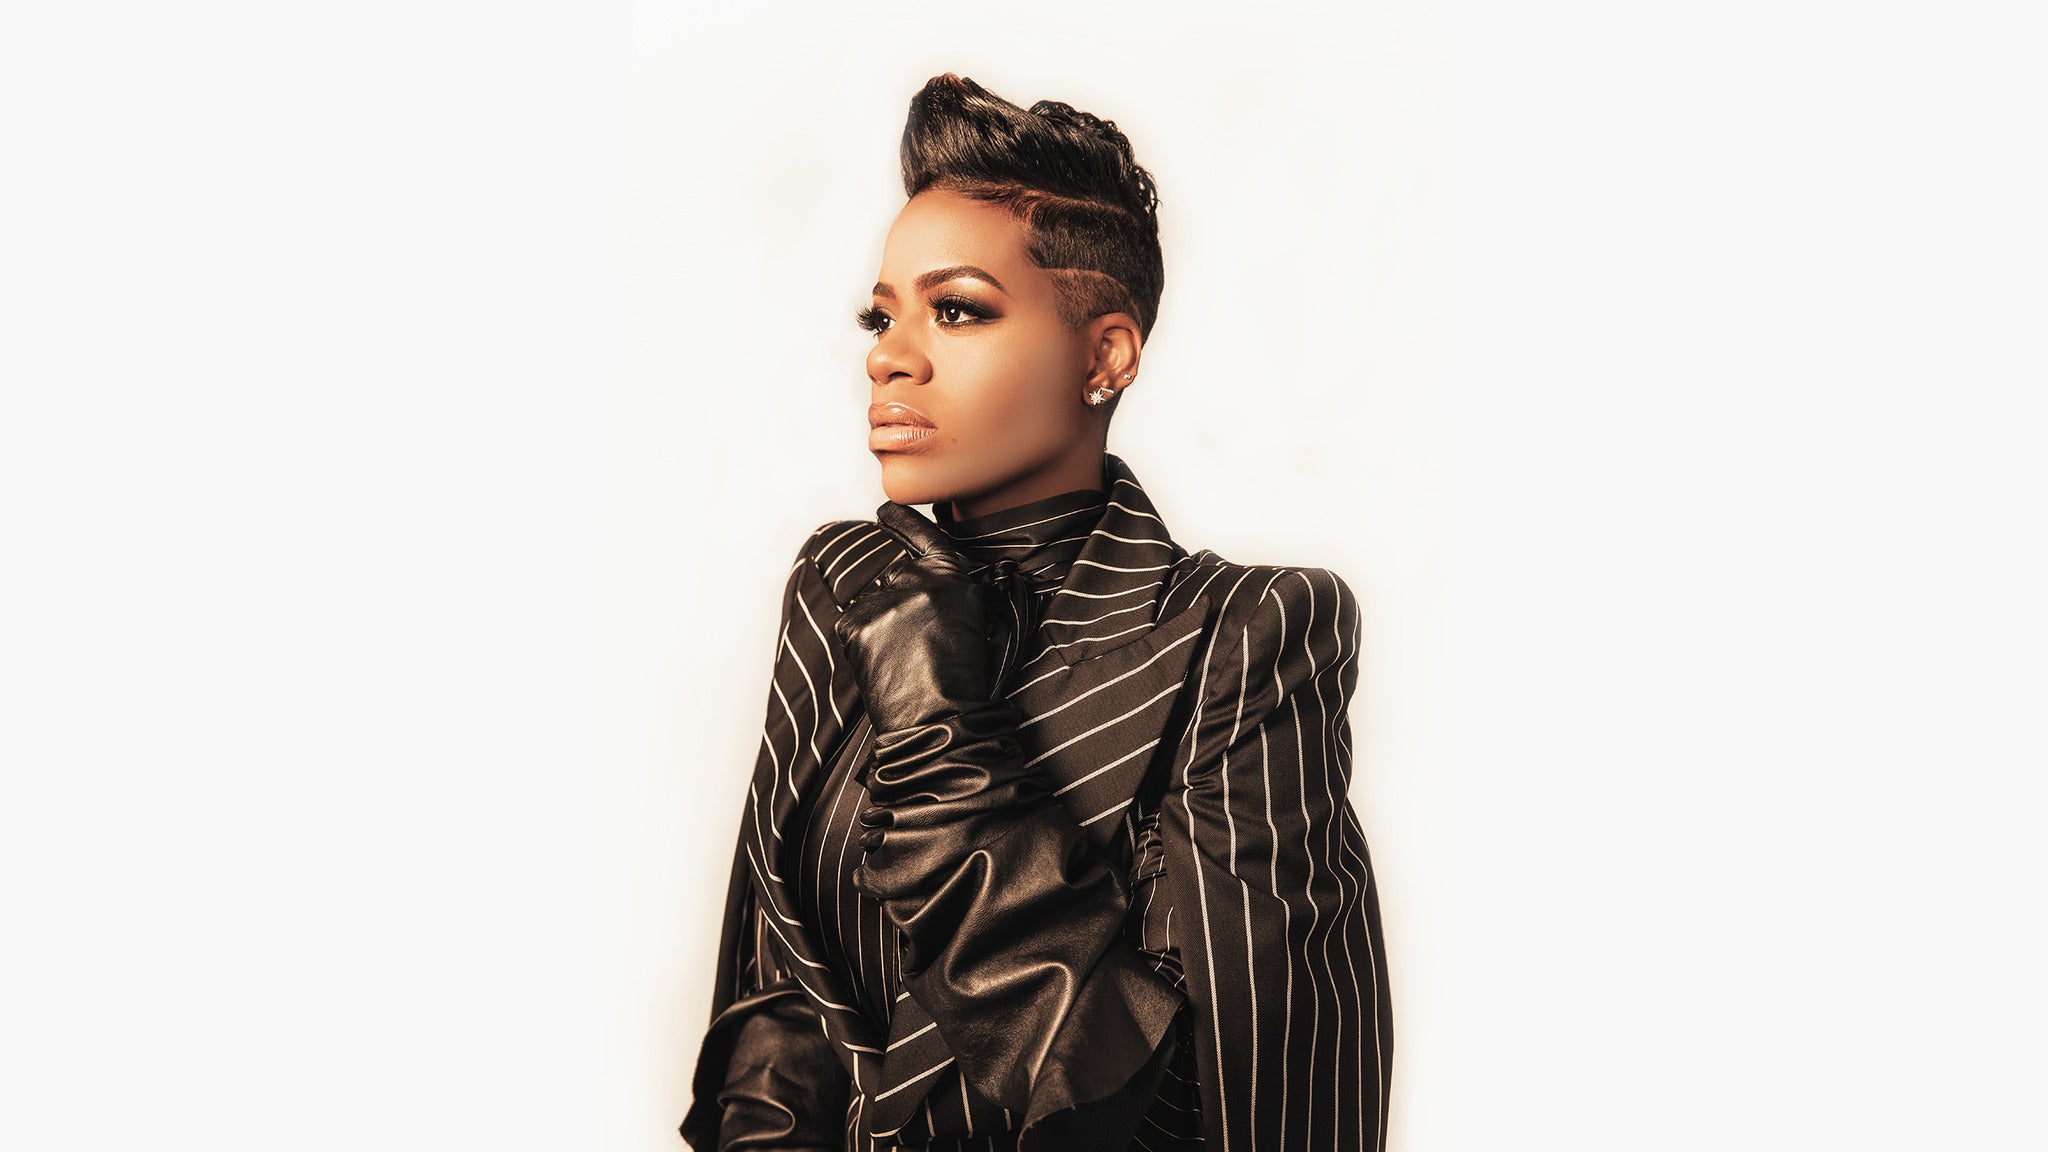 Fantasia With Joe presale password for your tickets in Ontario